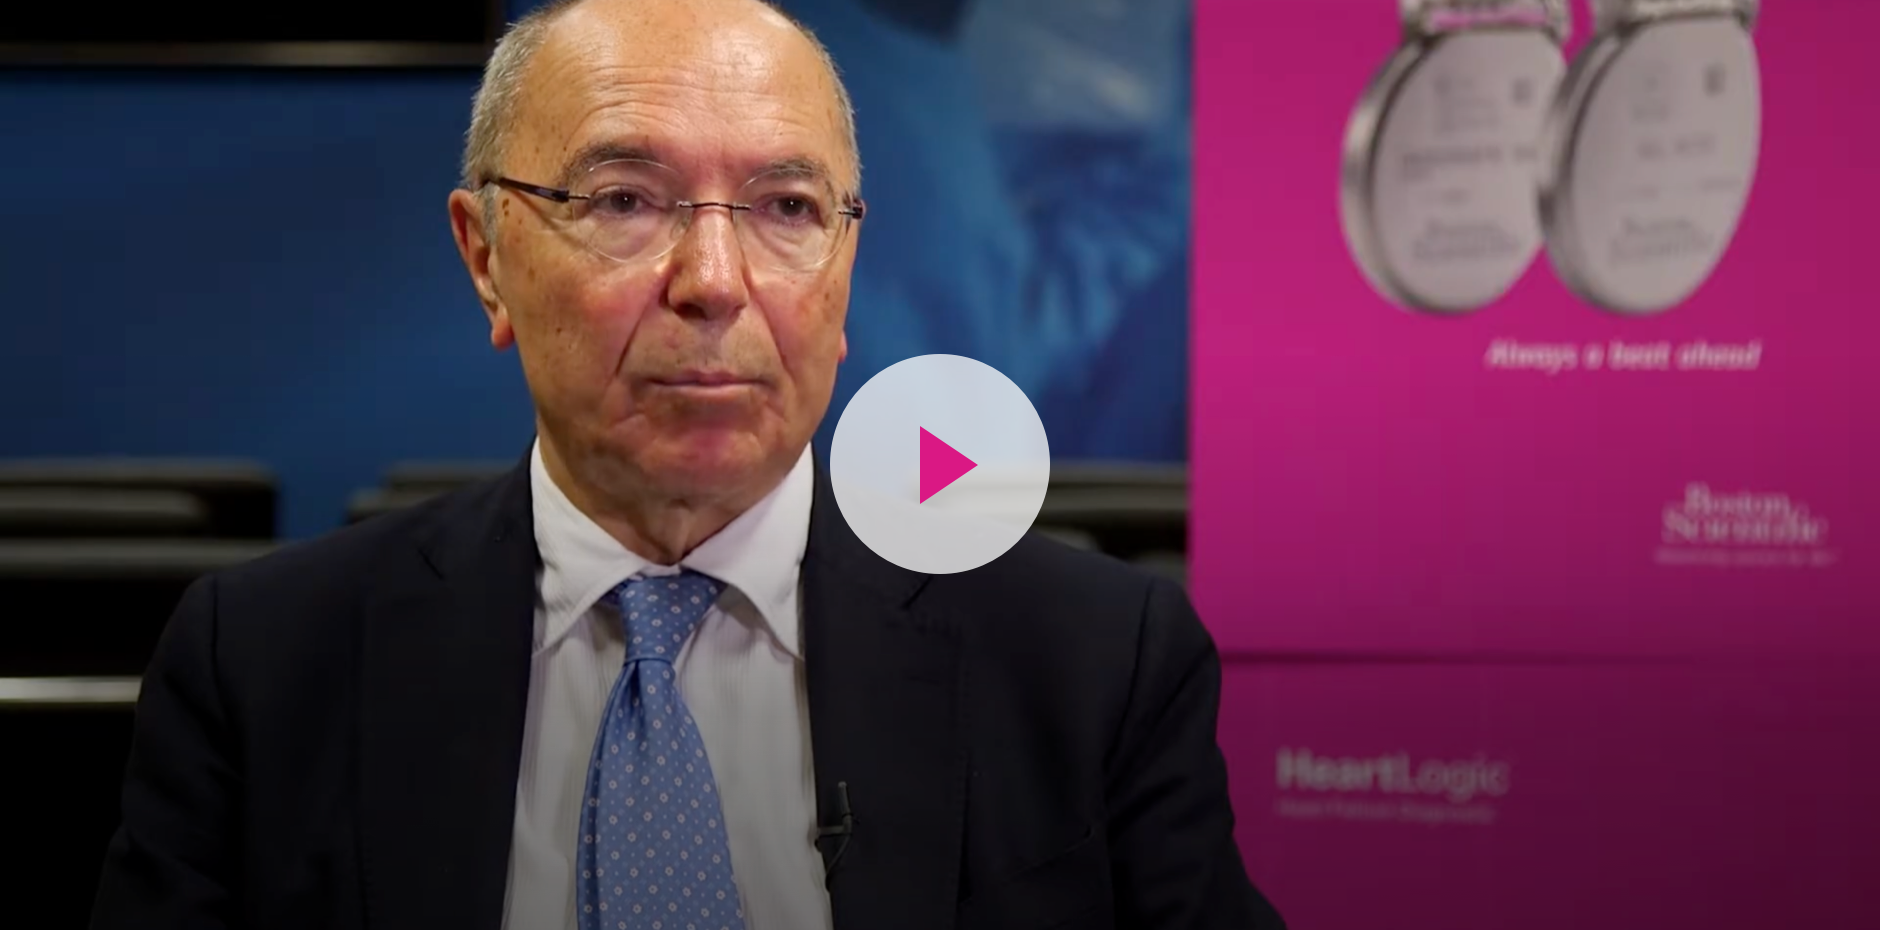 Professor Alessandro Capucci, MD discusses the results of the first analysis on temporal association of atrial fibrillation with HeartLogic Heart Failure Diagnostic.